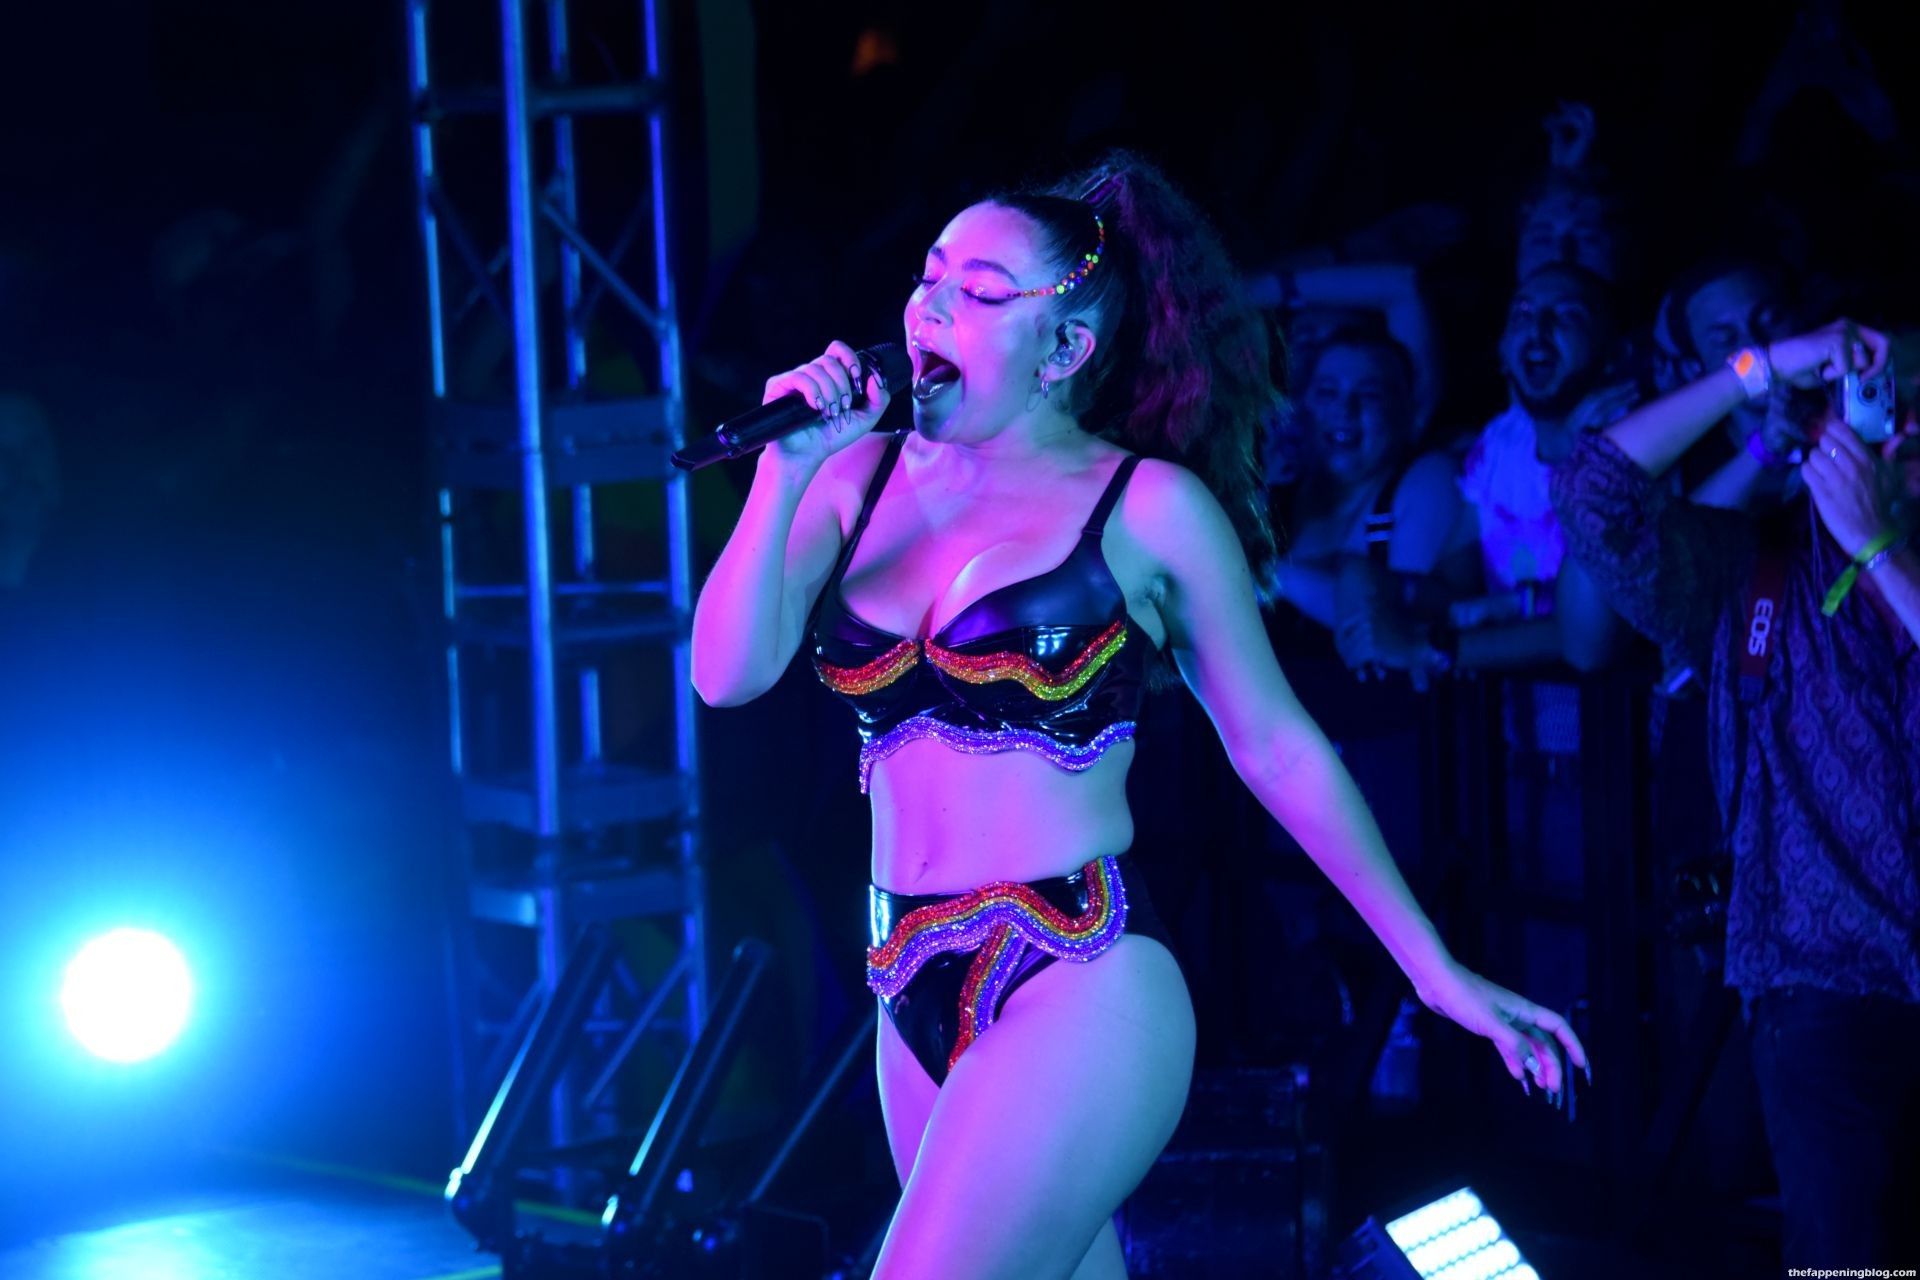 Charli-XCX-Sexy-on-Stage-24-thefappeningblog.com_.jpg